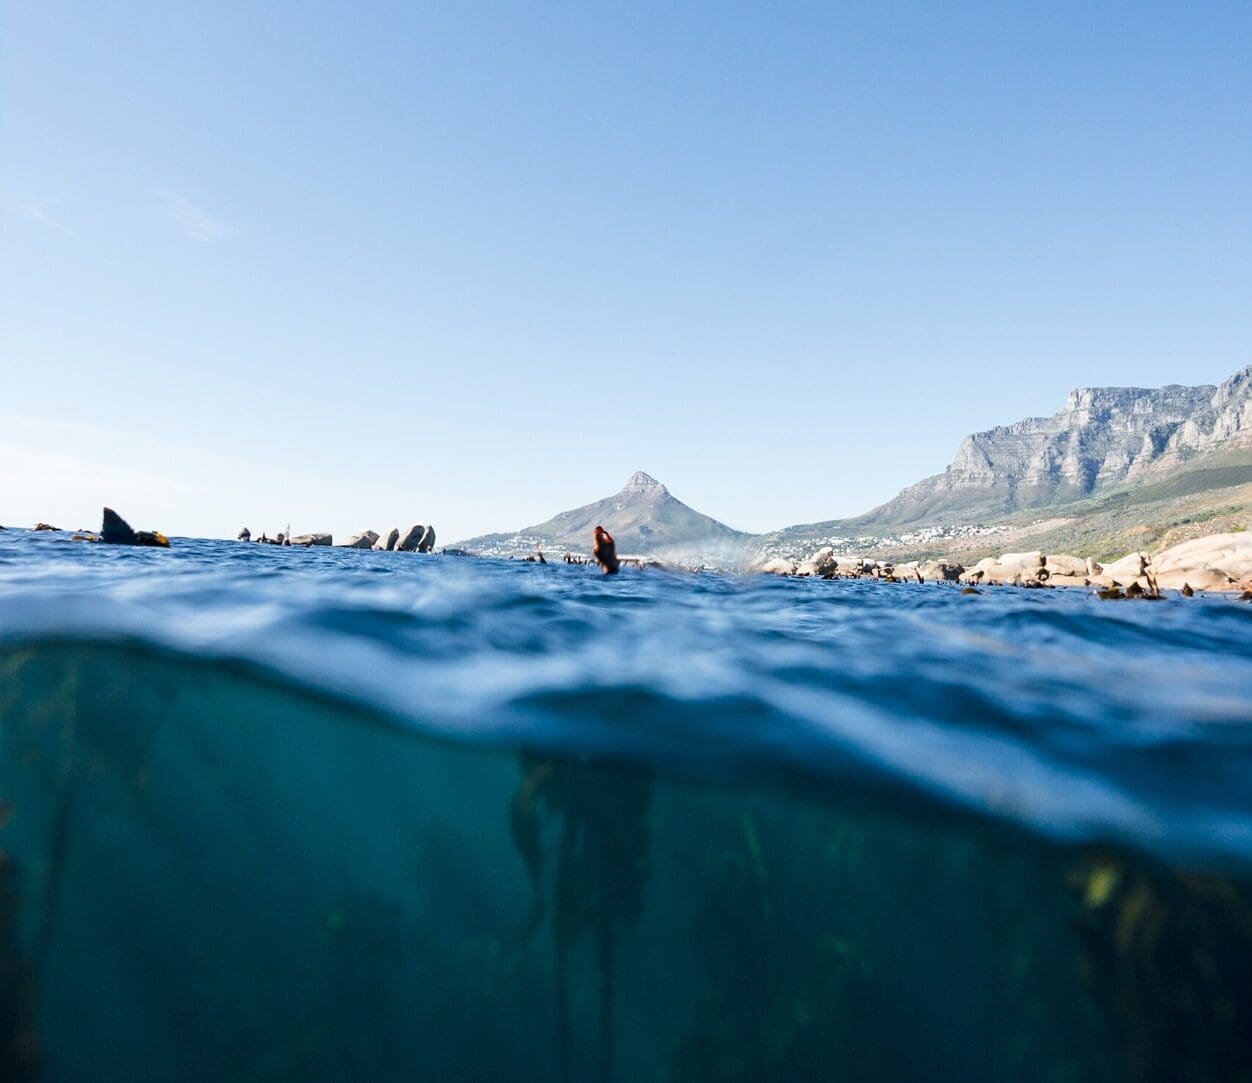 A diver's view emerging from the water in Cape Town, South Africa